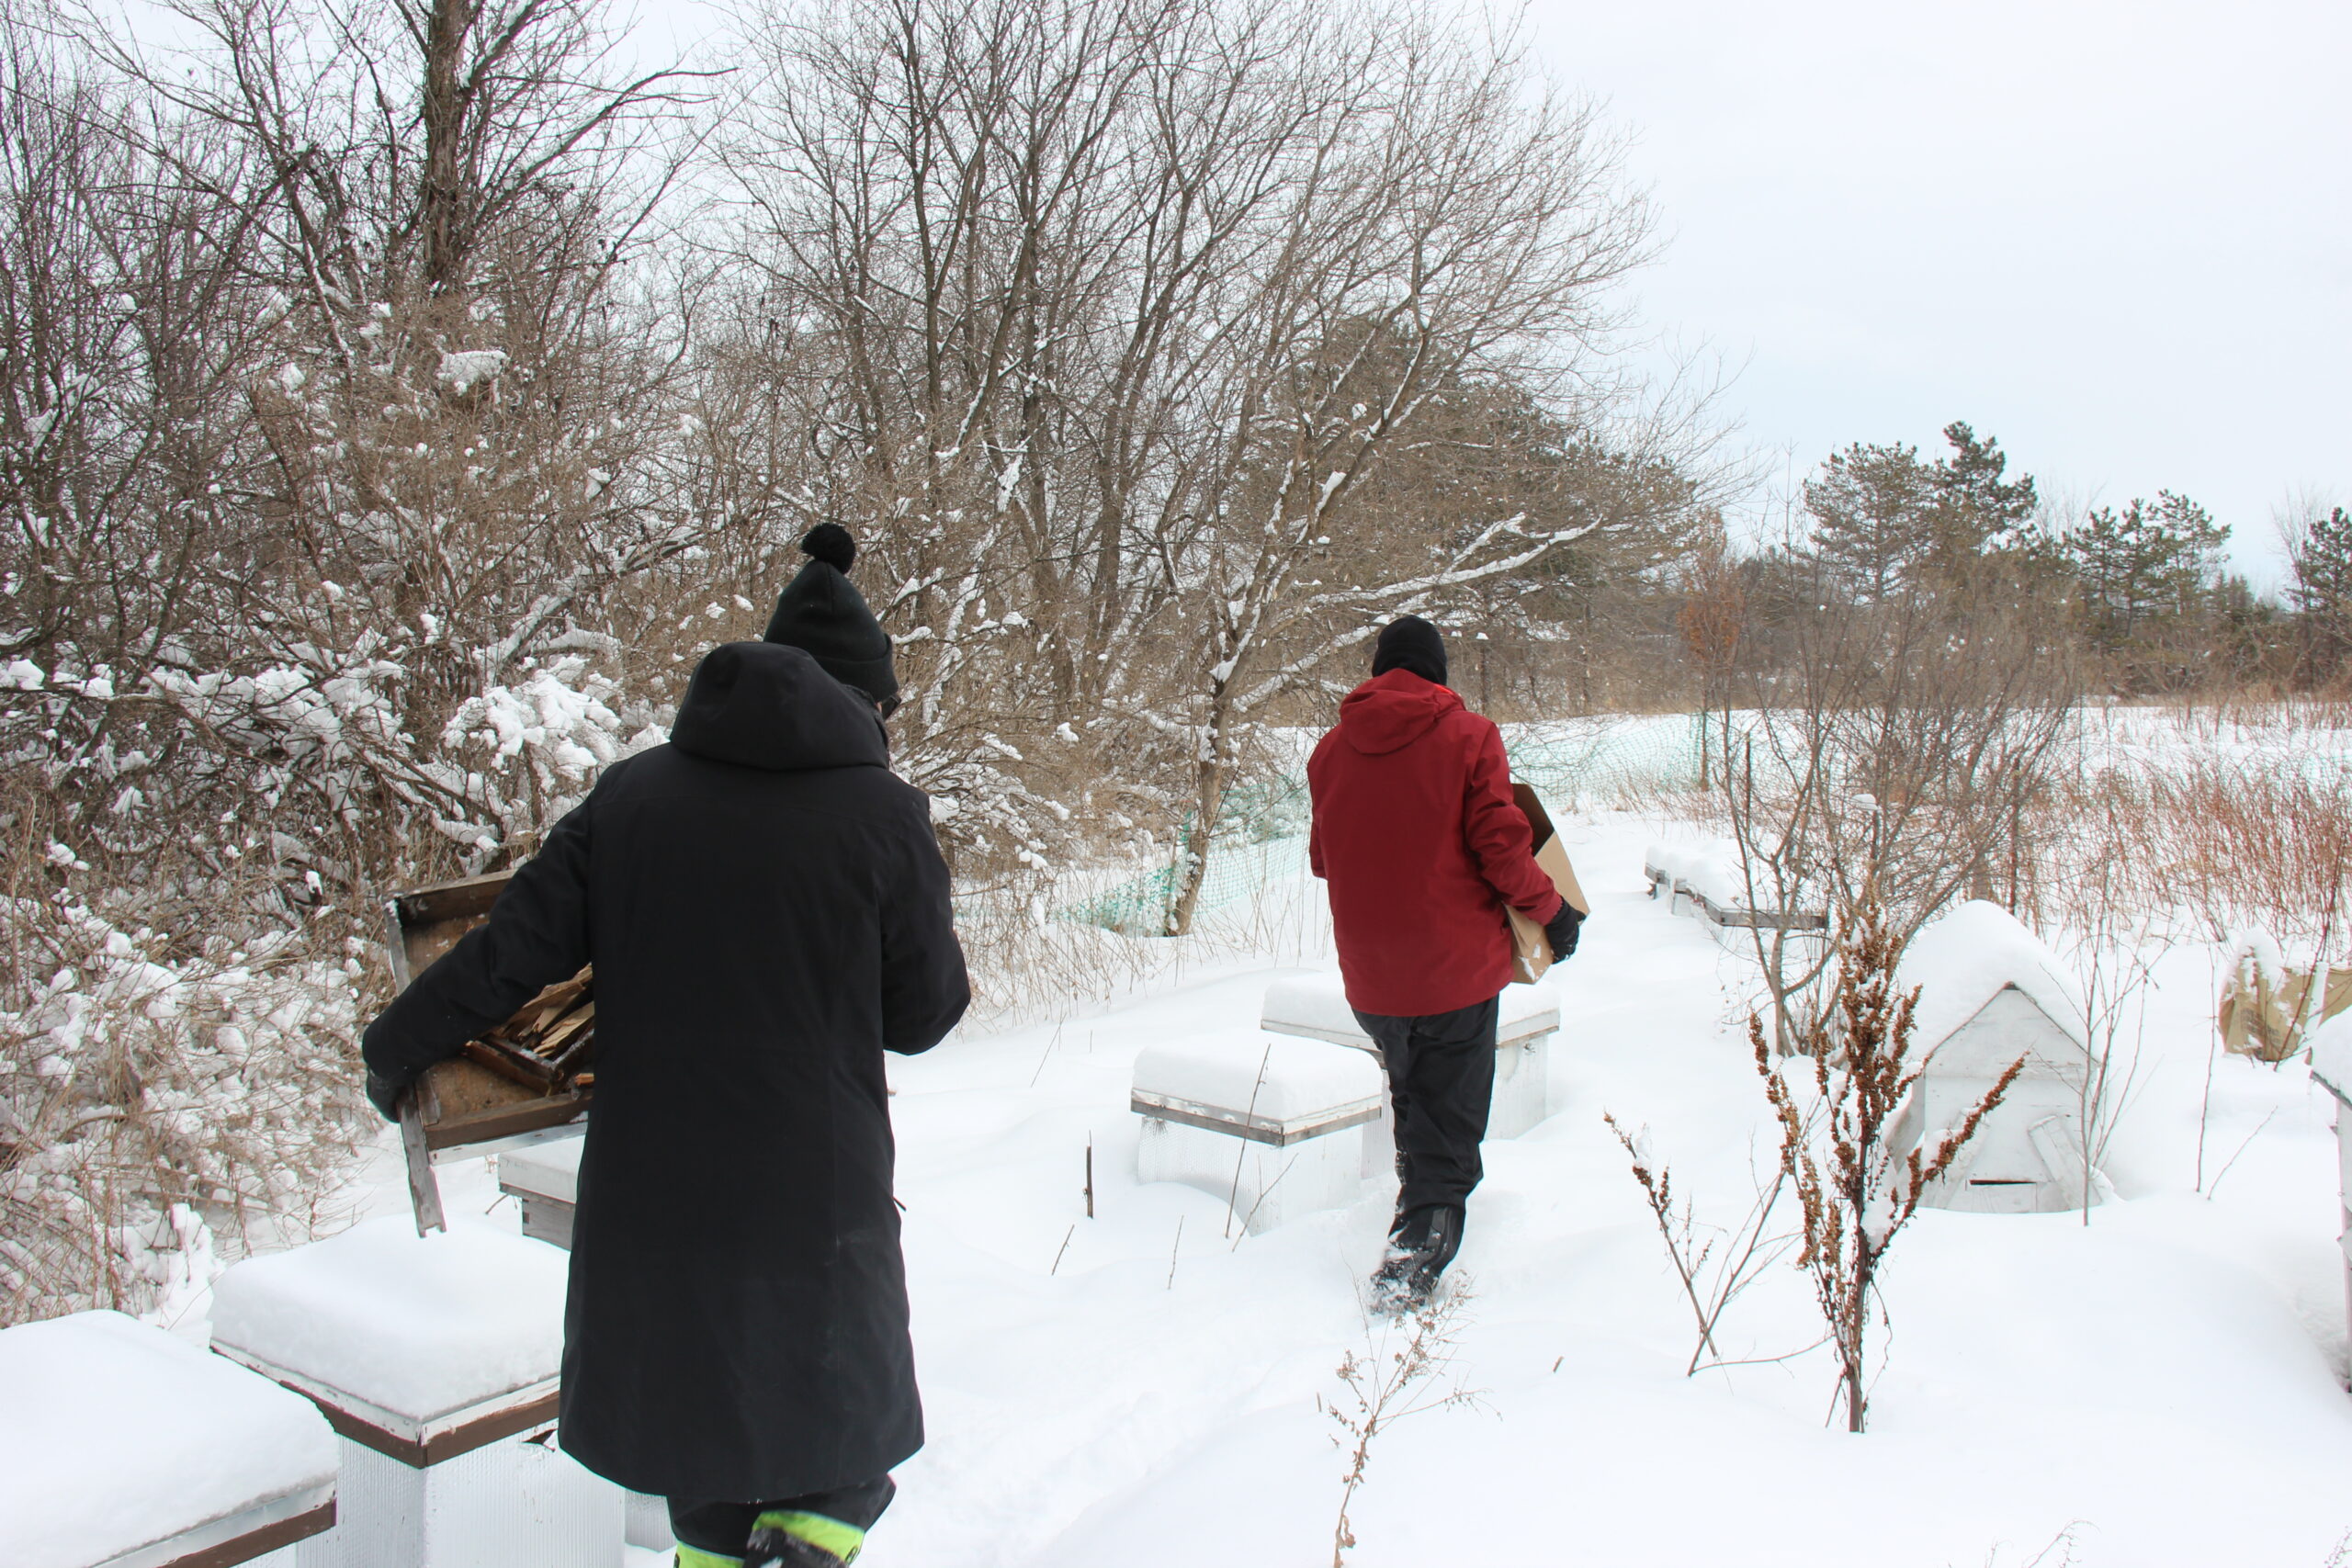 Beekeepers walking in snow holding boxes.